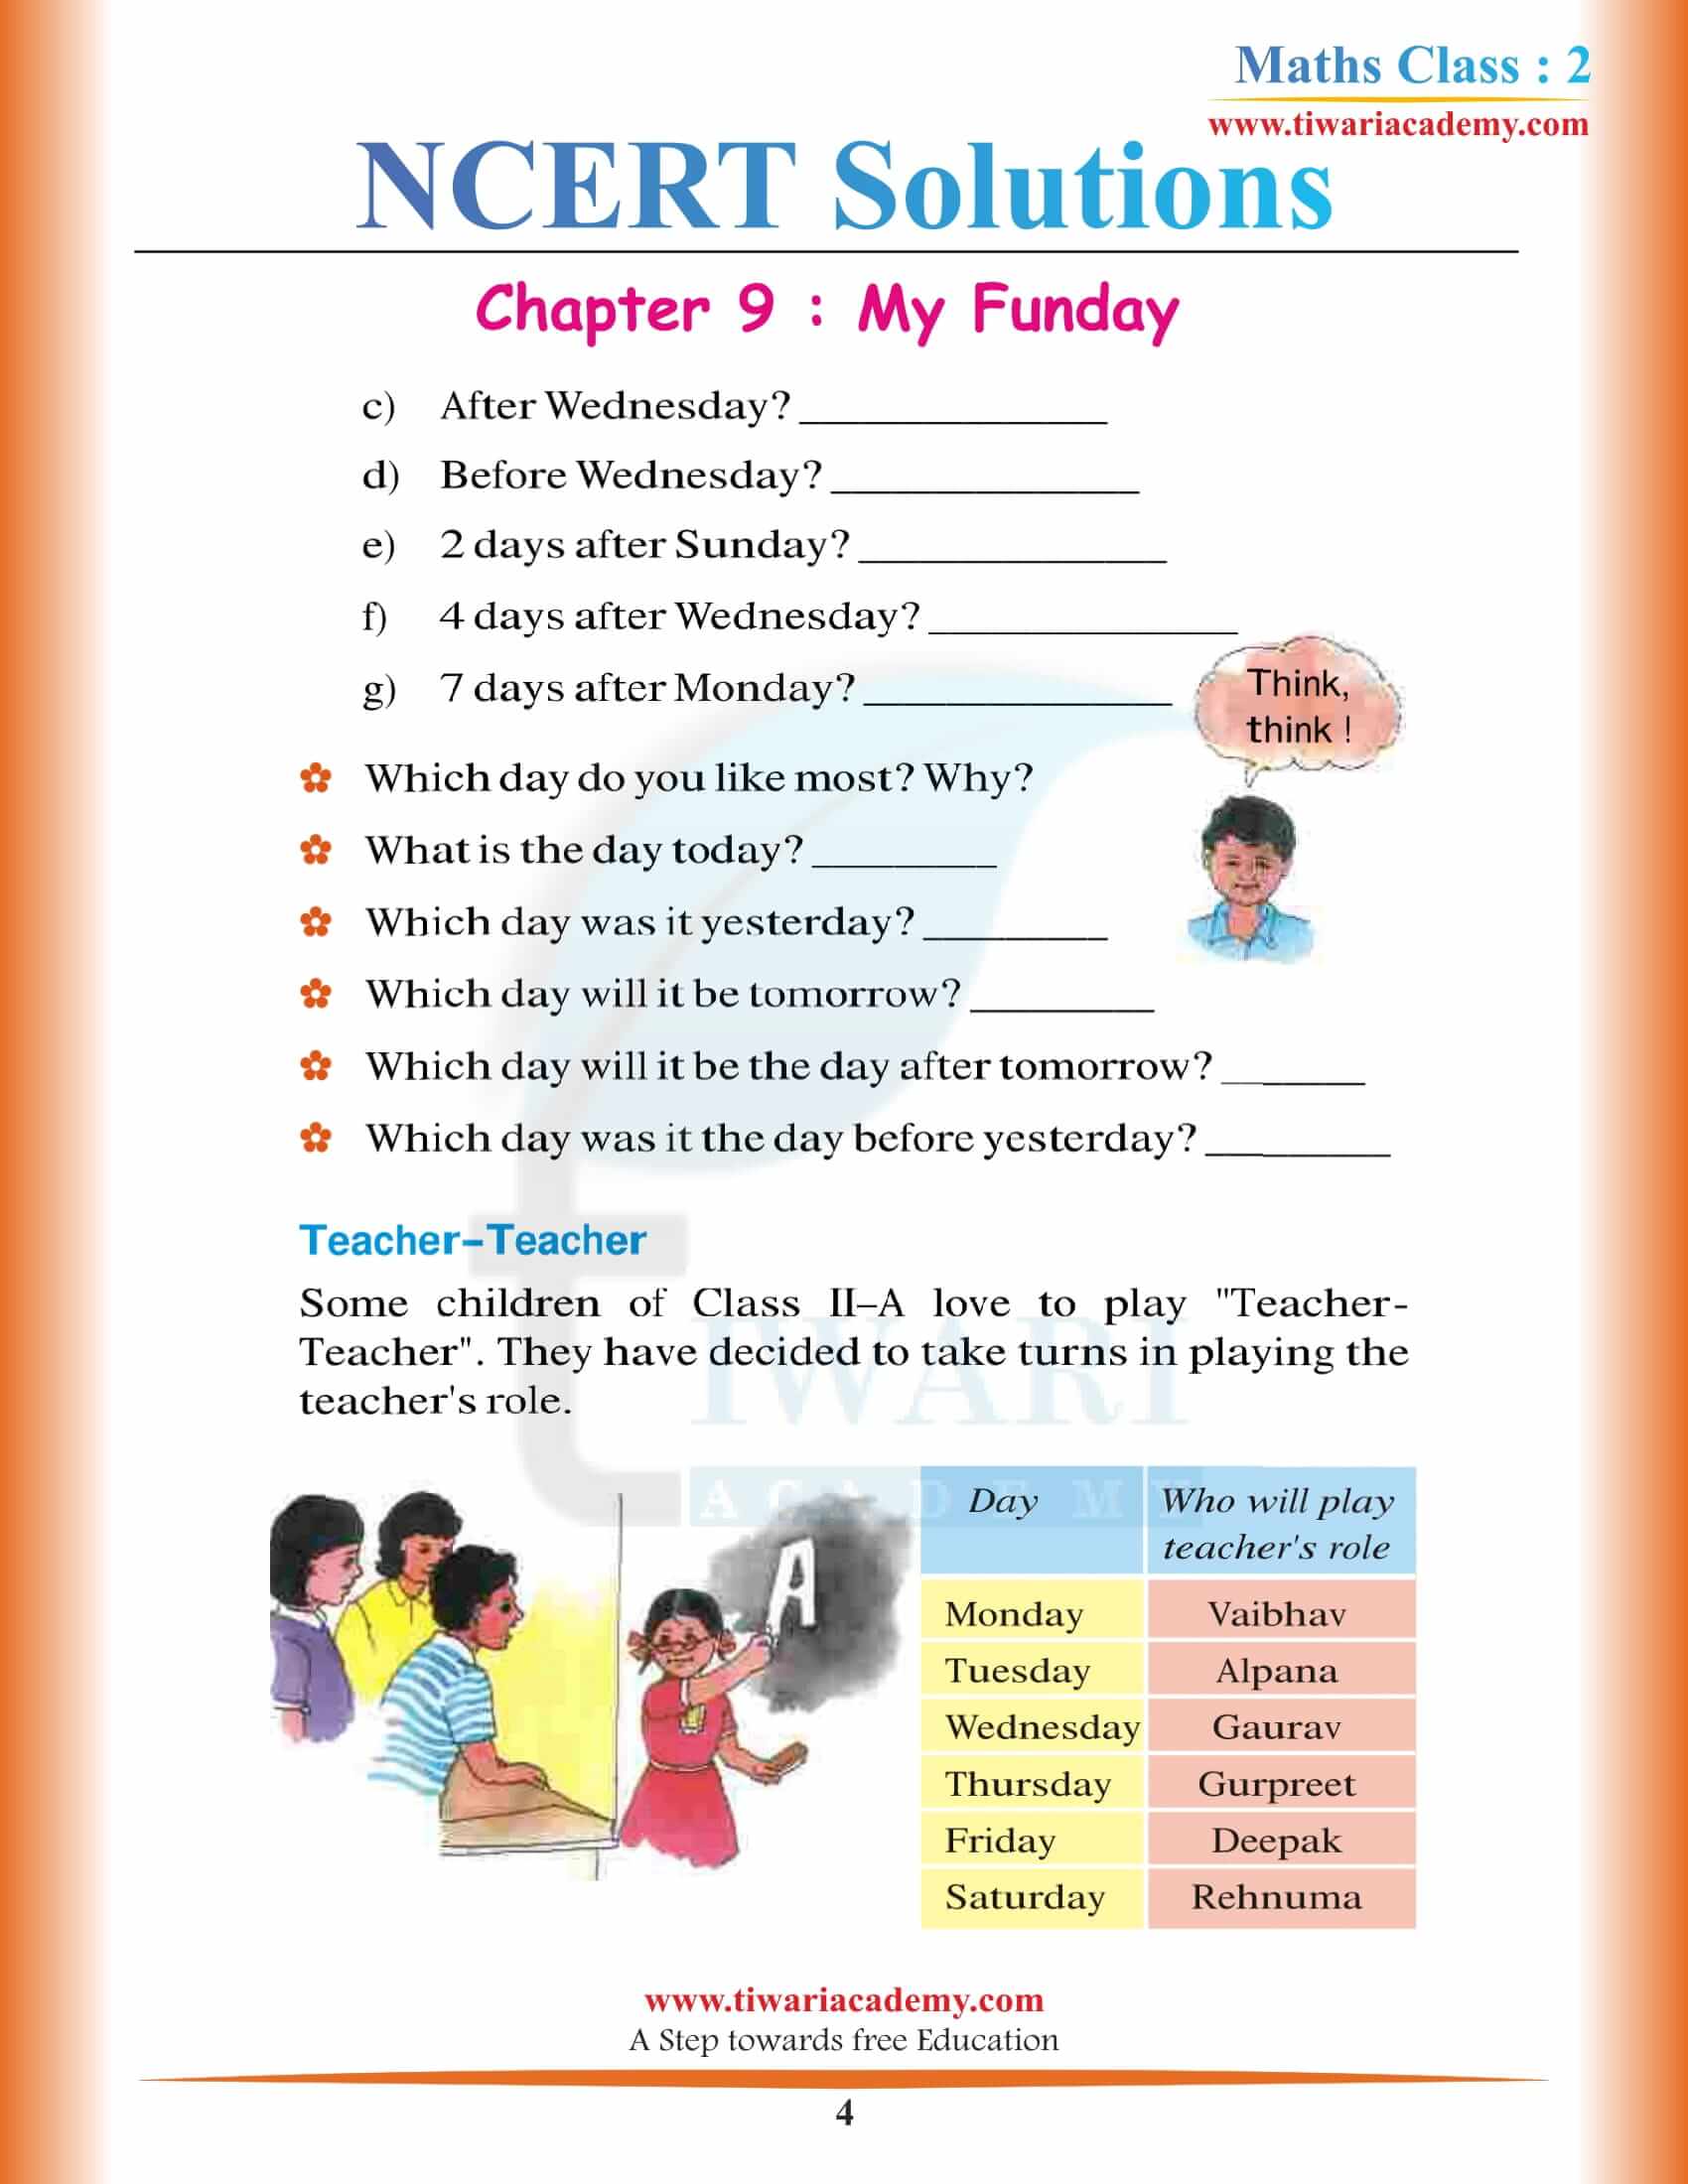 NCERT Solutions for Class 2 Maths Chapter 9 in PDF